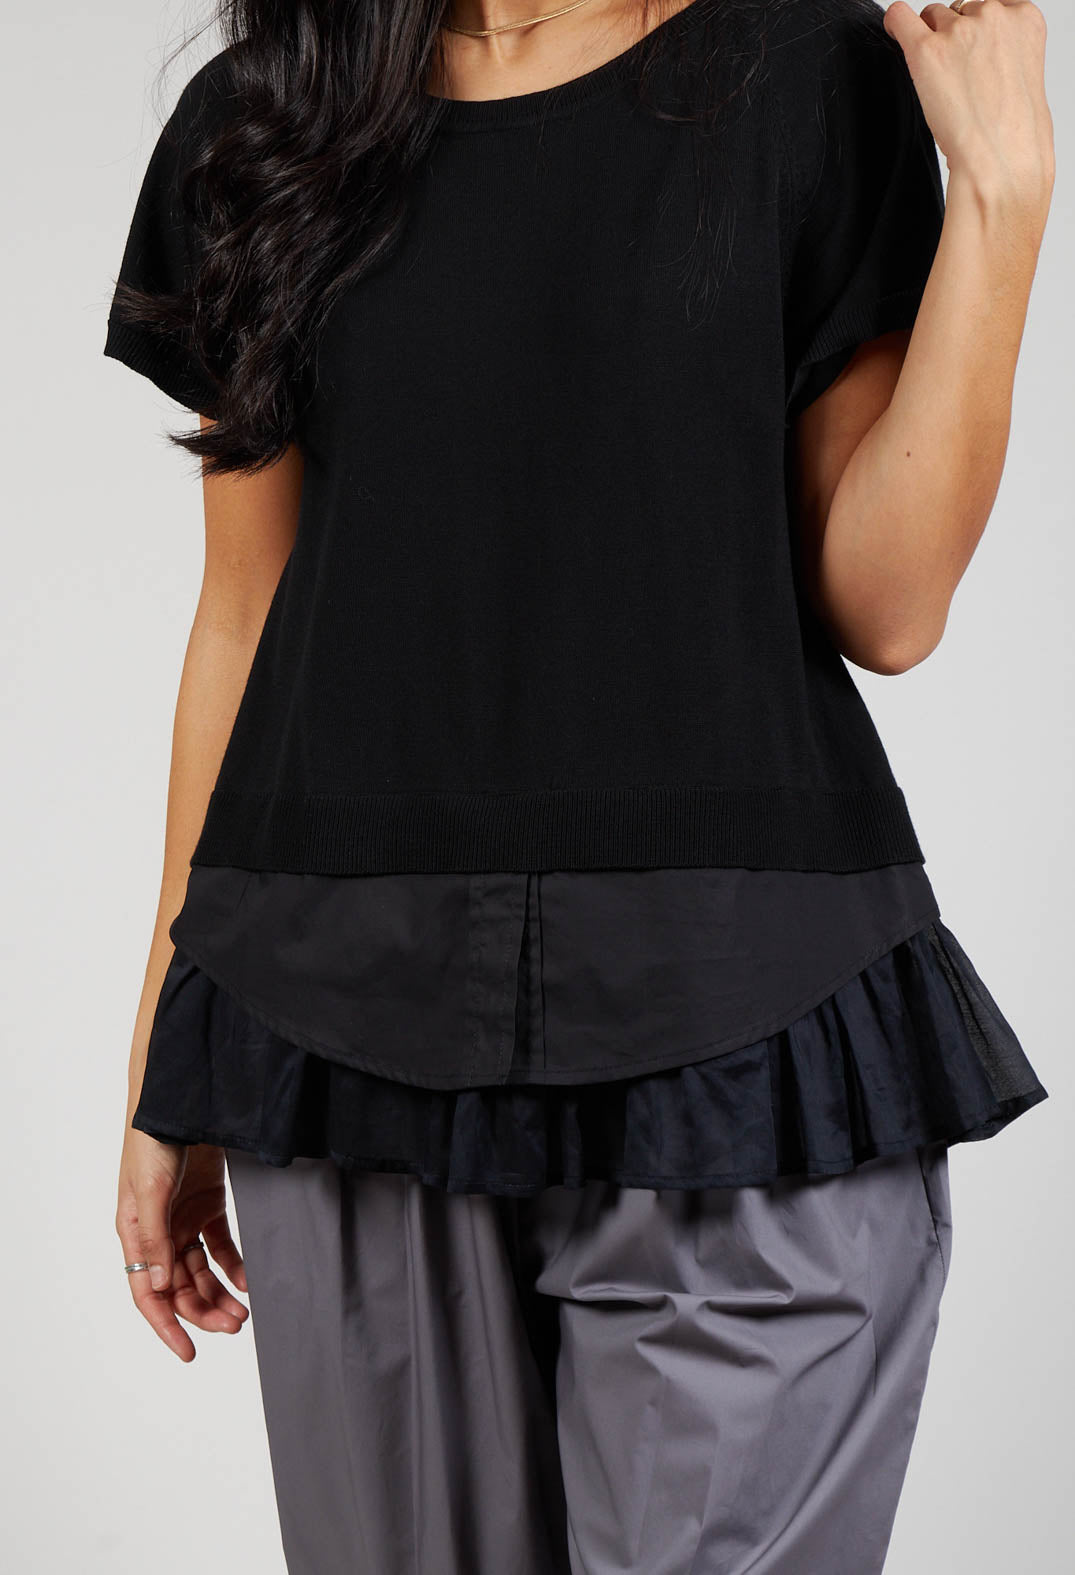 Sweater Top with Layered Hem in Black